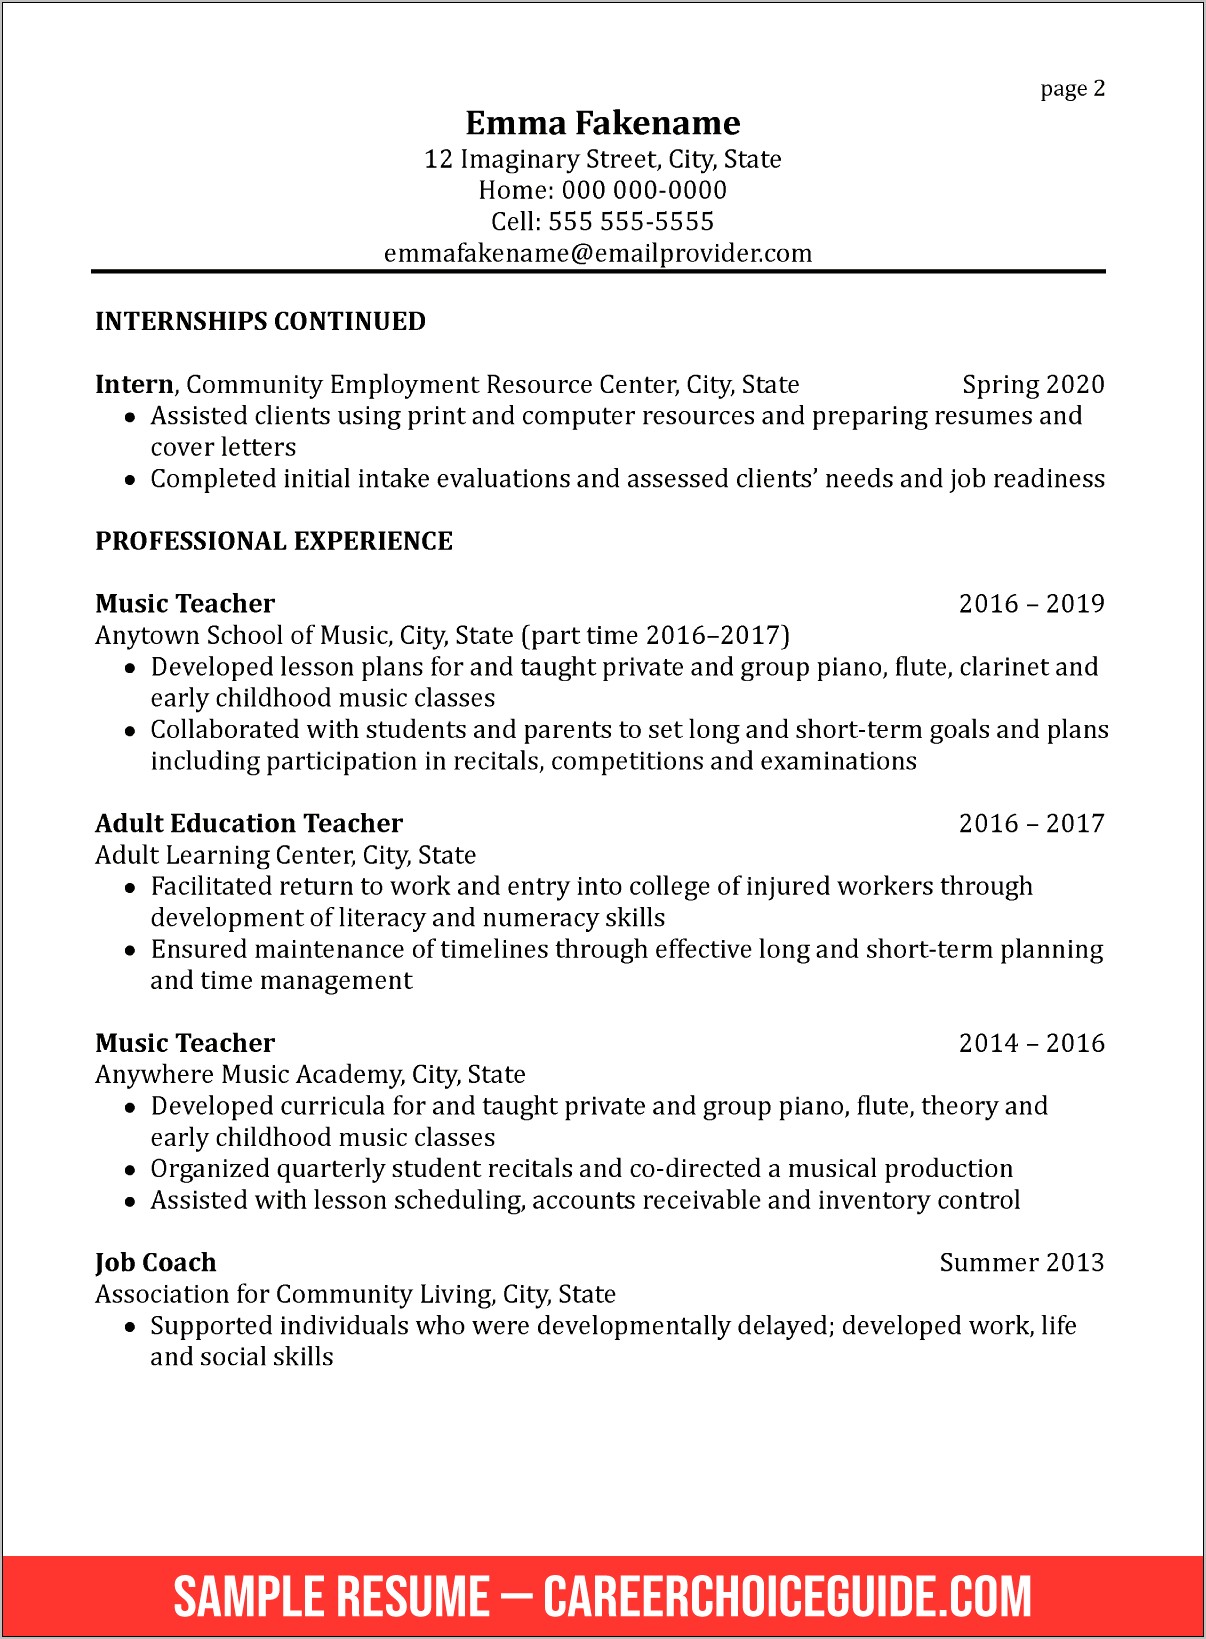 Sample Resume For A College Teaching Position